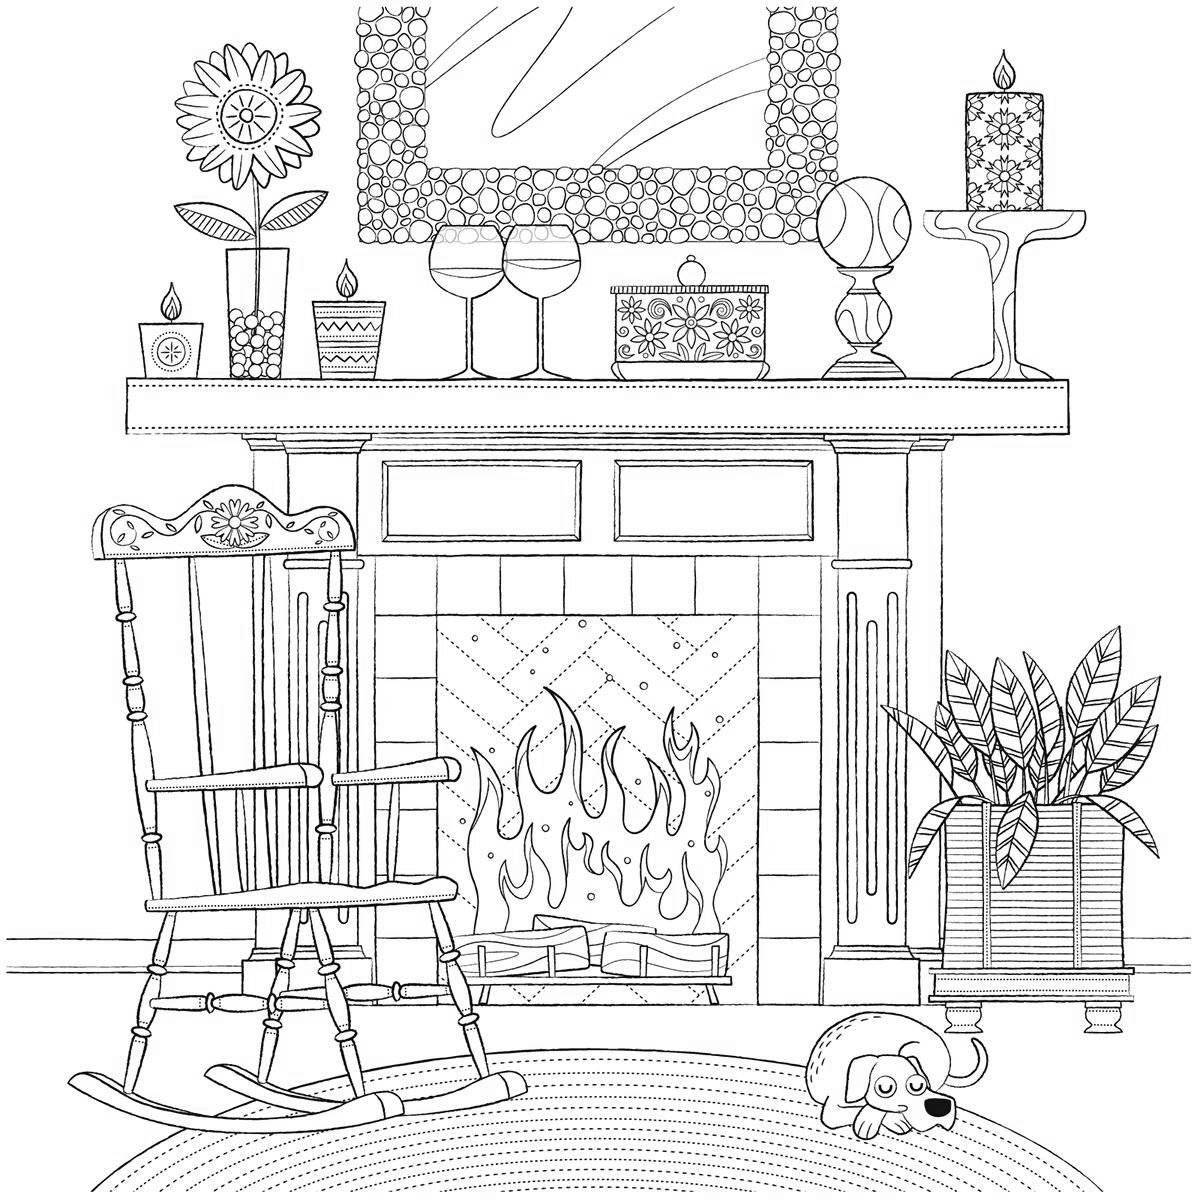 Coloring cute fireplace for kids